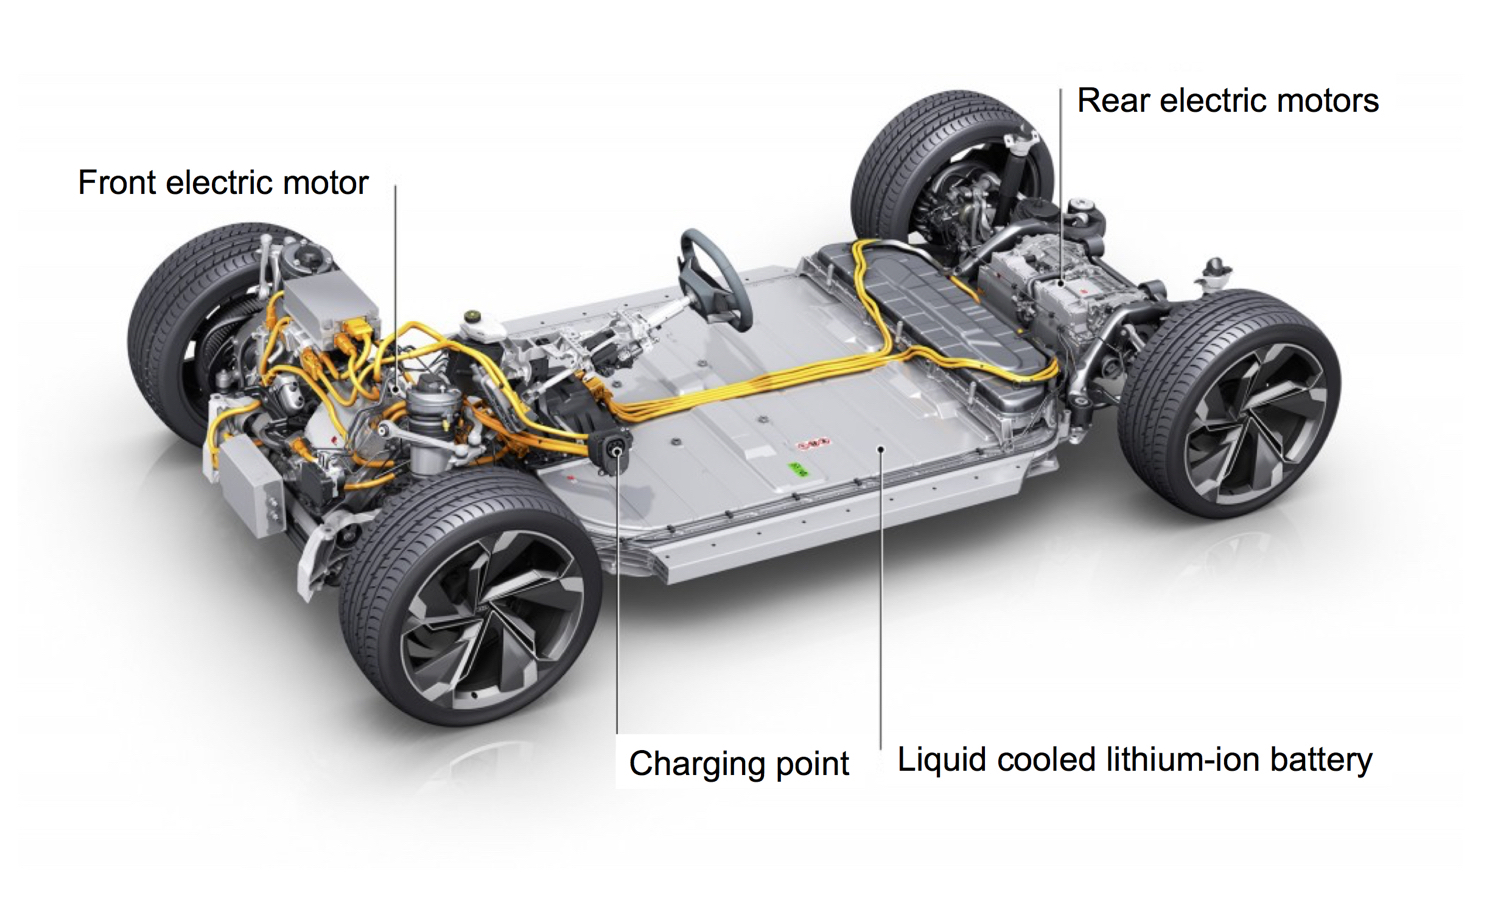 Figure 4. Extruded battery enclosure design in the skateboard style for the Audi e-tron.